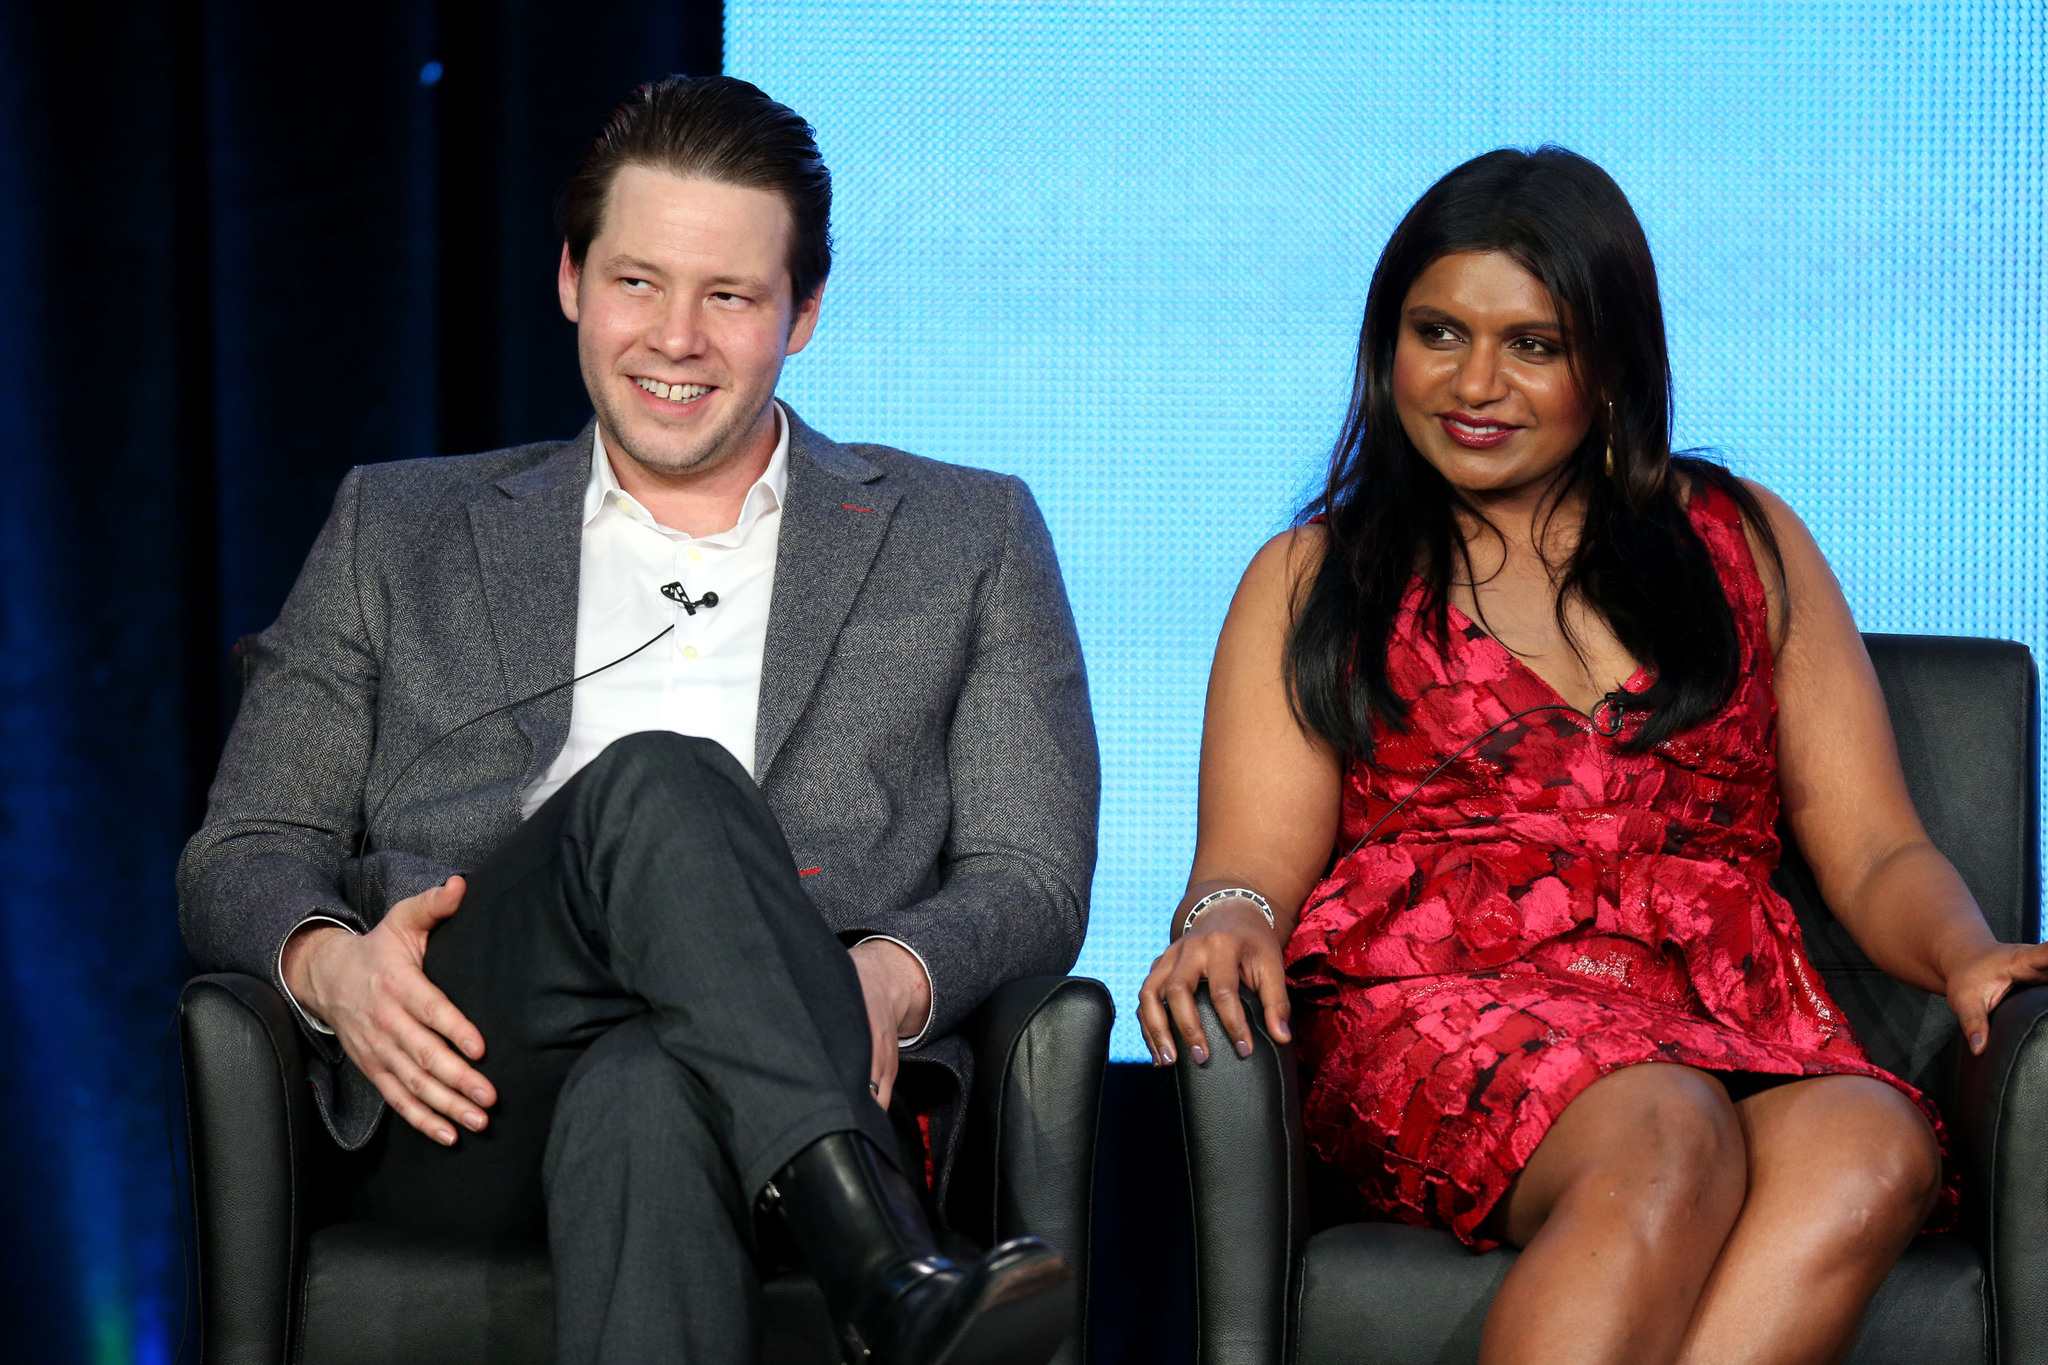 Ike Barinholtz and Mindy Kaling at event of The Mindy Project (2012)